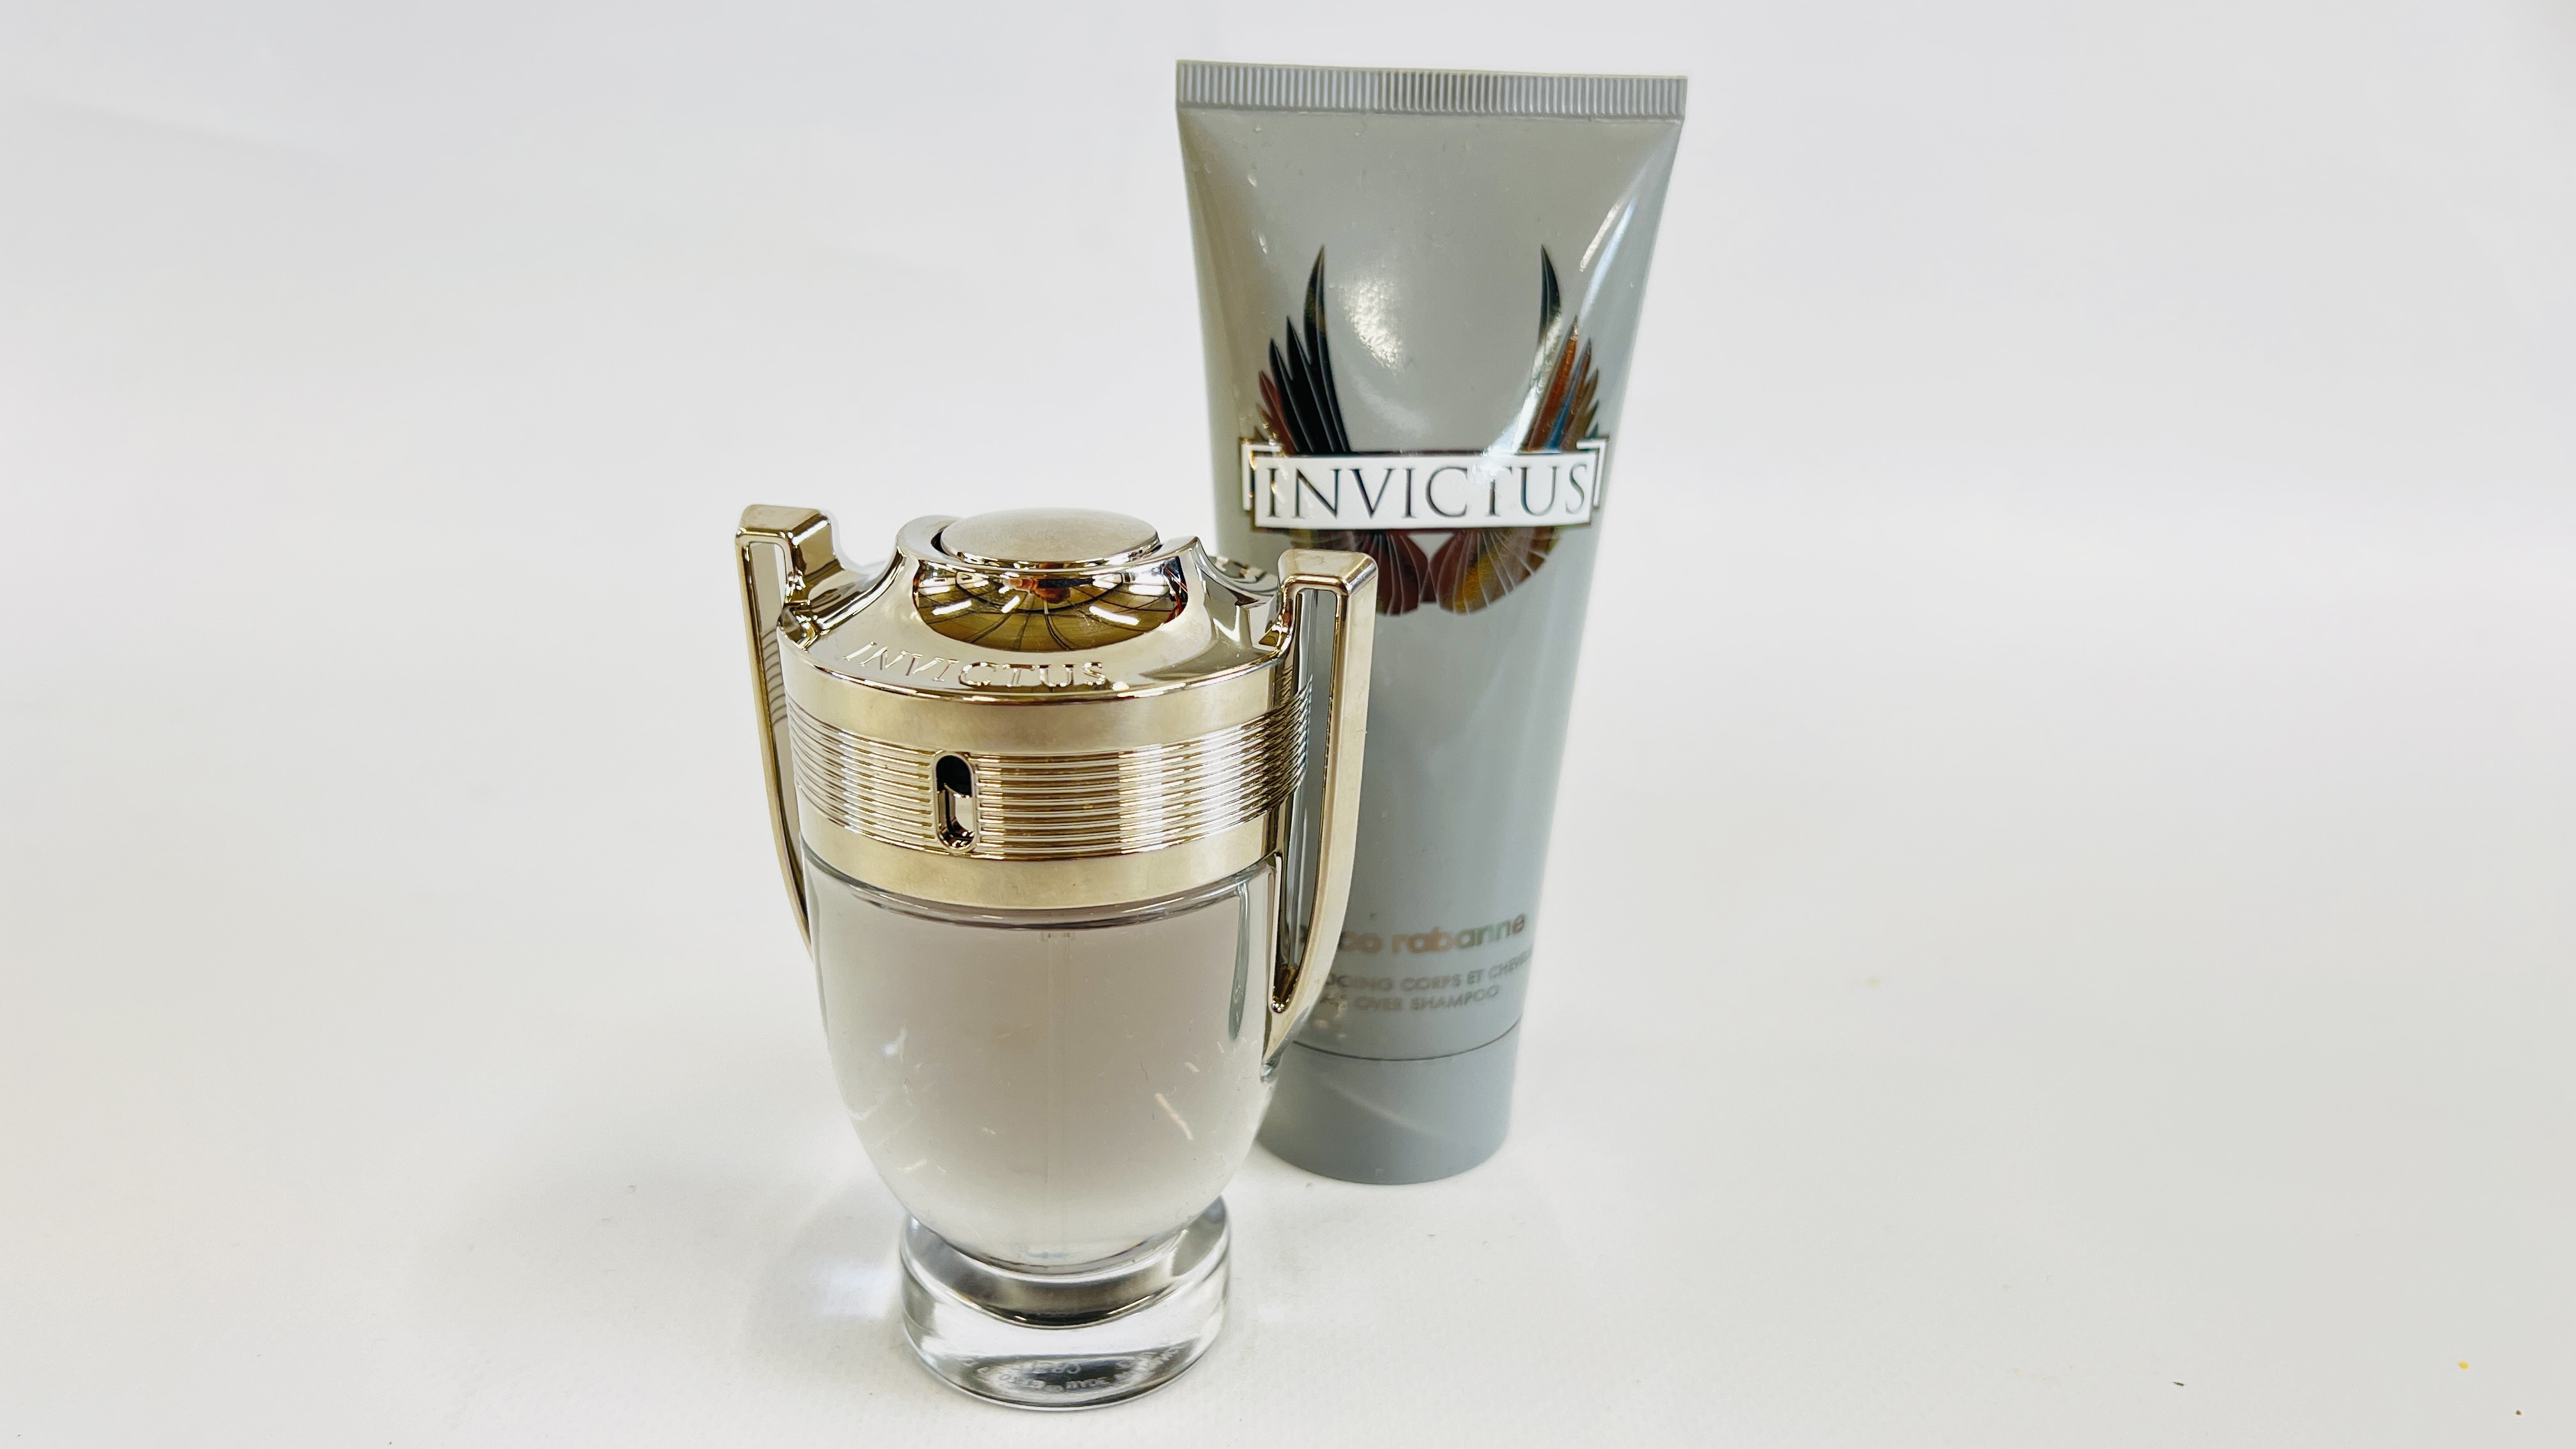 A PACO RABANNE INVICTUS GIFT SET. - Image 5 of 5